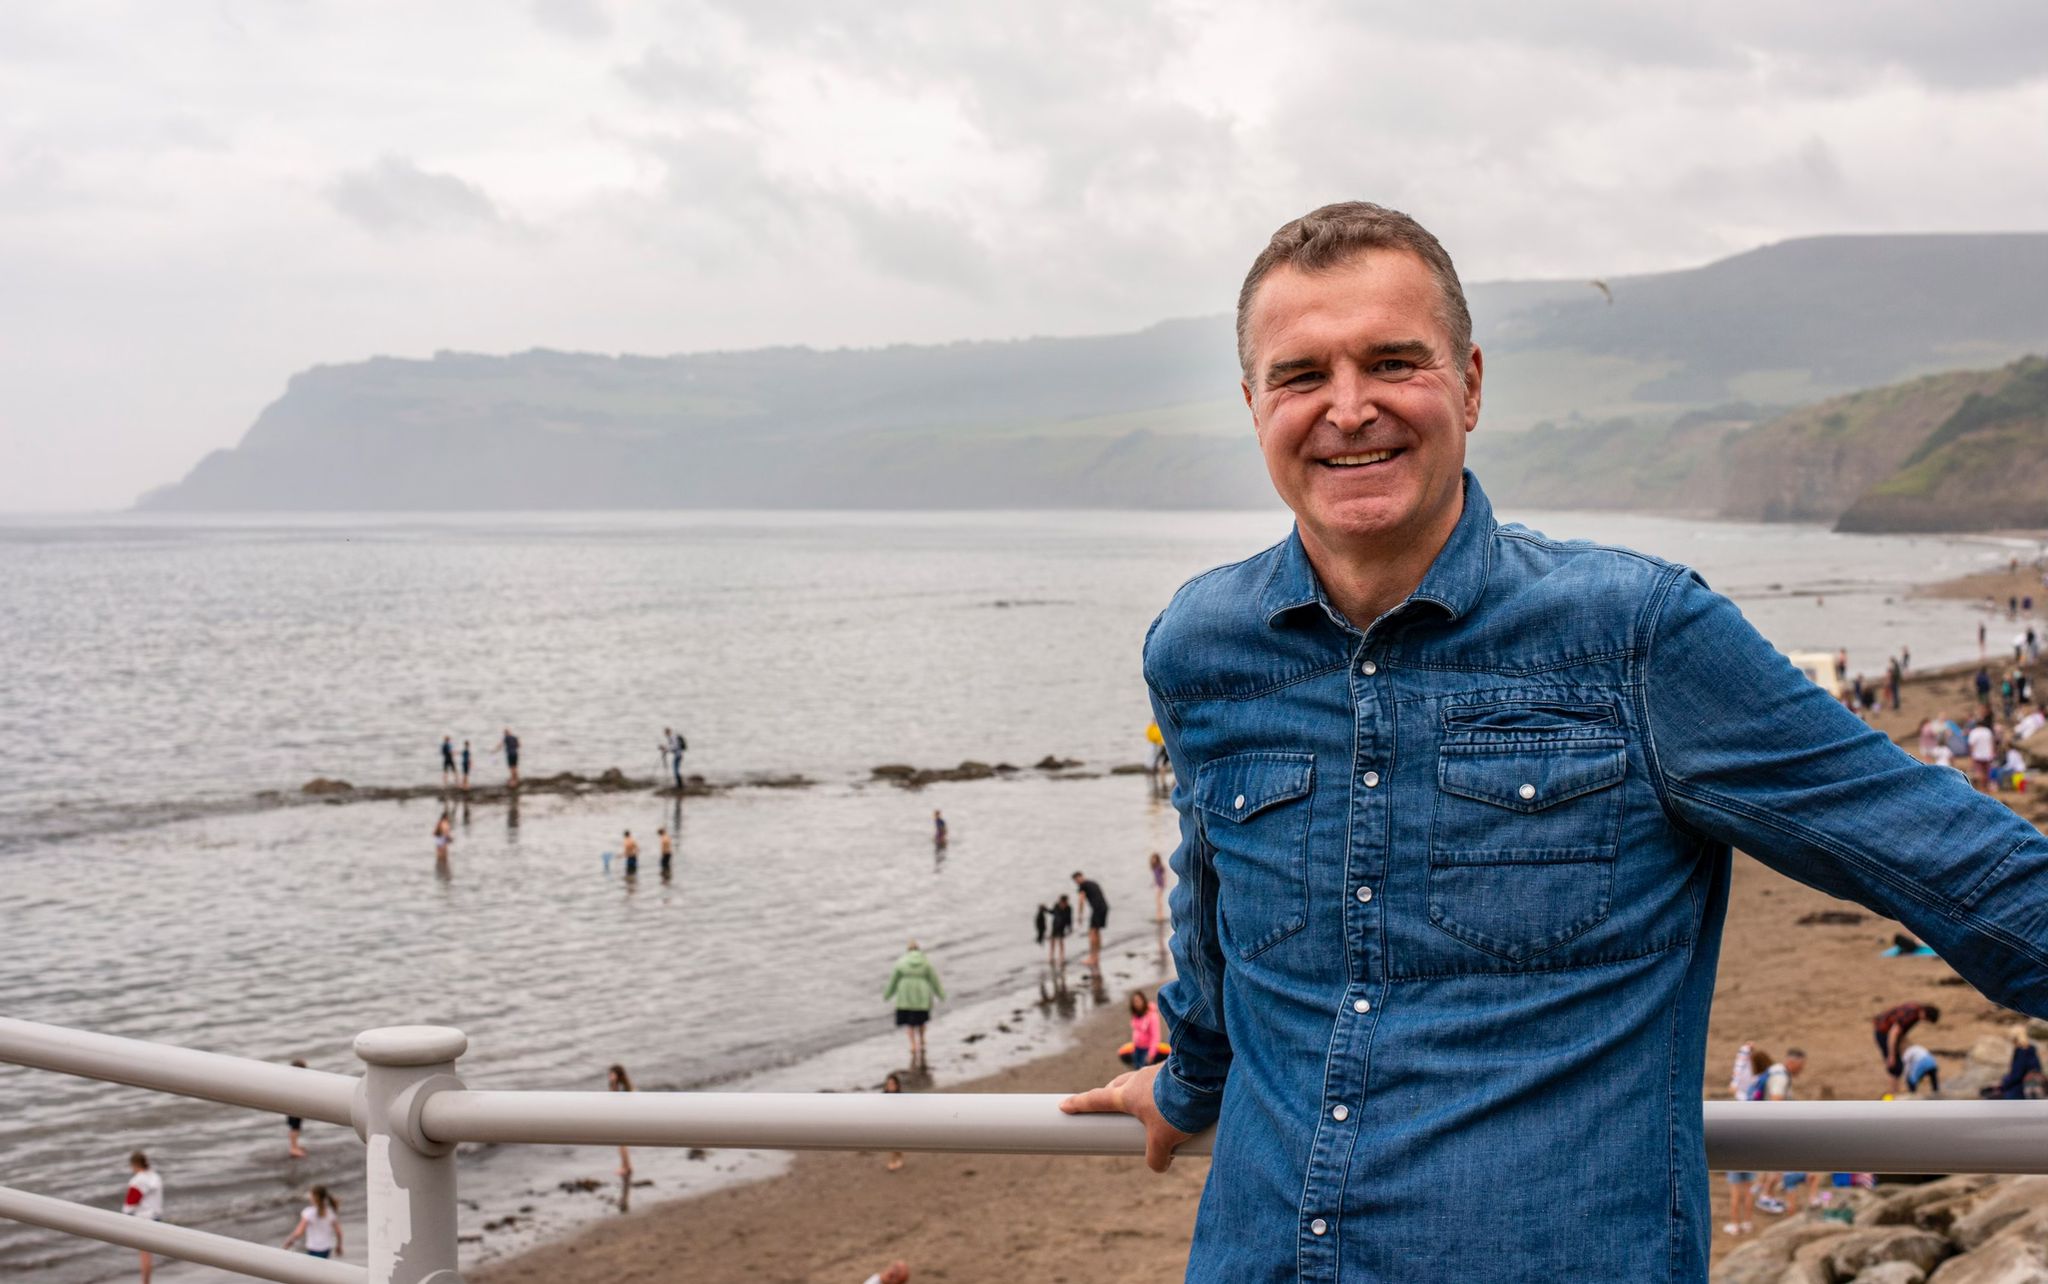 Clark spends time in Robin Hood's Bay, fundraising for Parkinson's UK and watching Bruce Springsteen